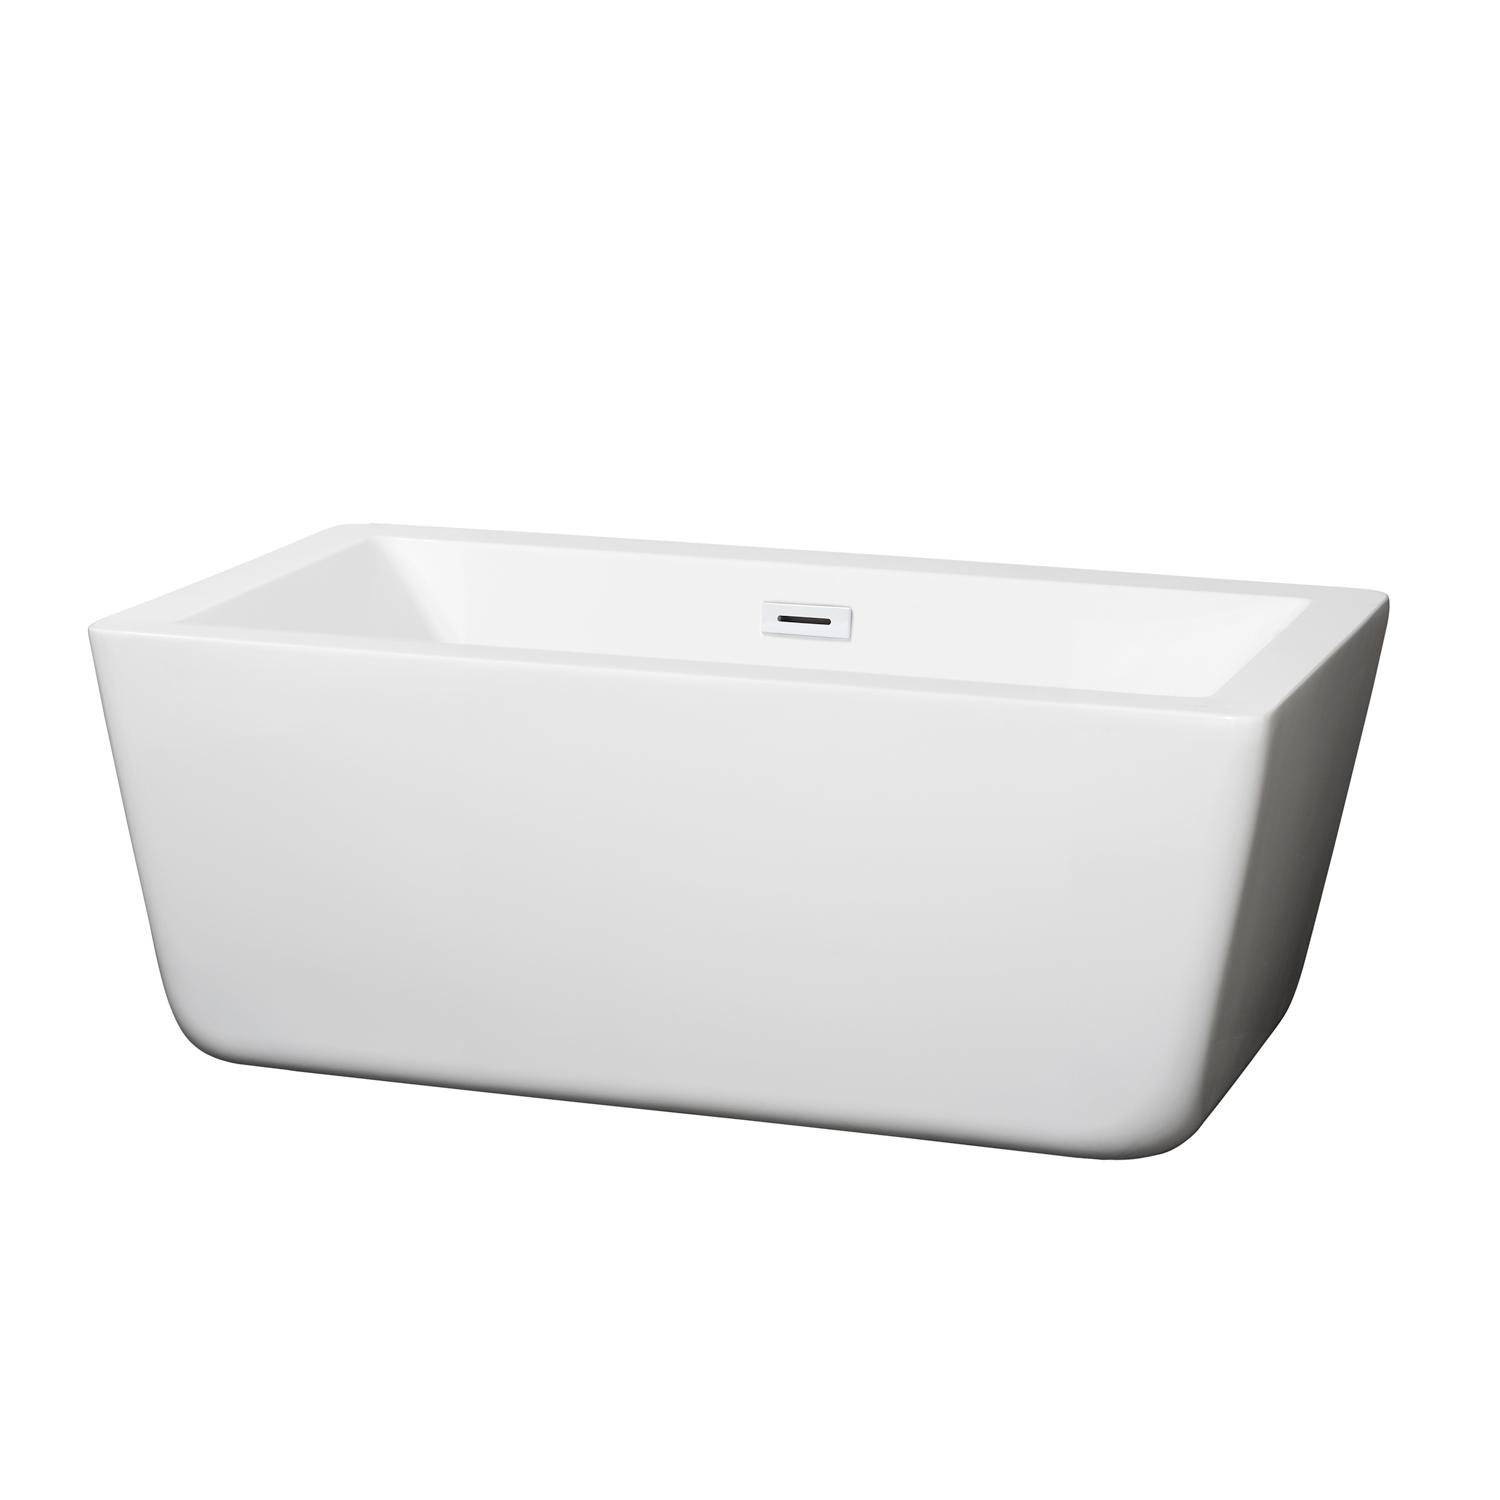 59" Freestanding Bathtub in White with Shiny White Drain and Overflow Trim